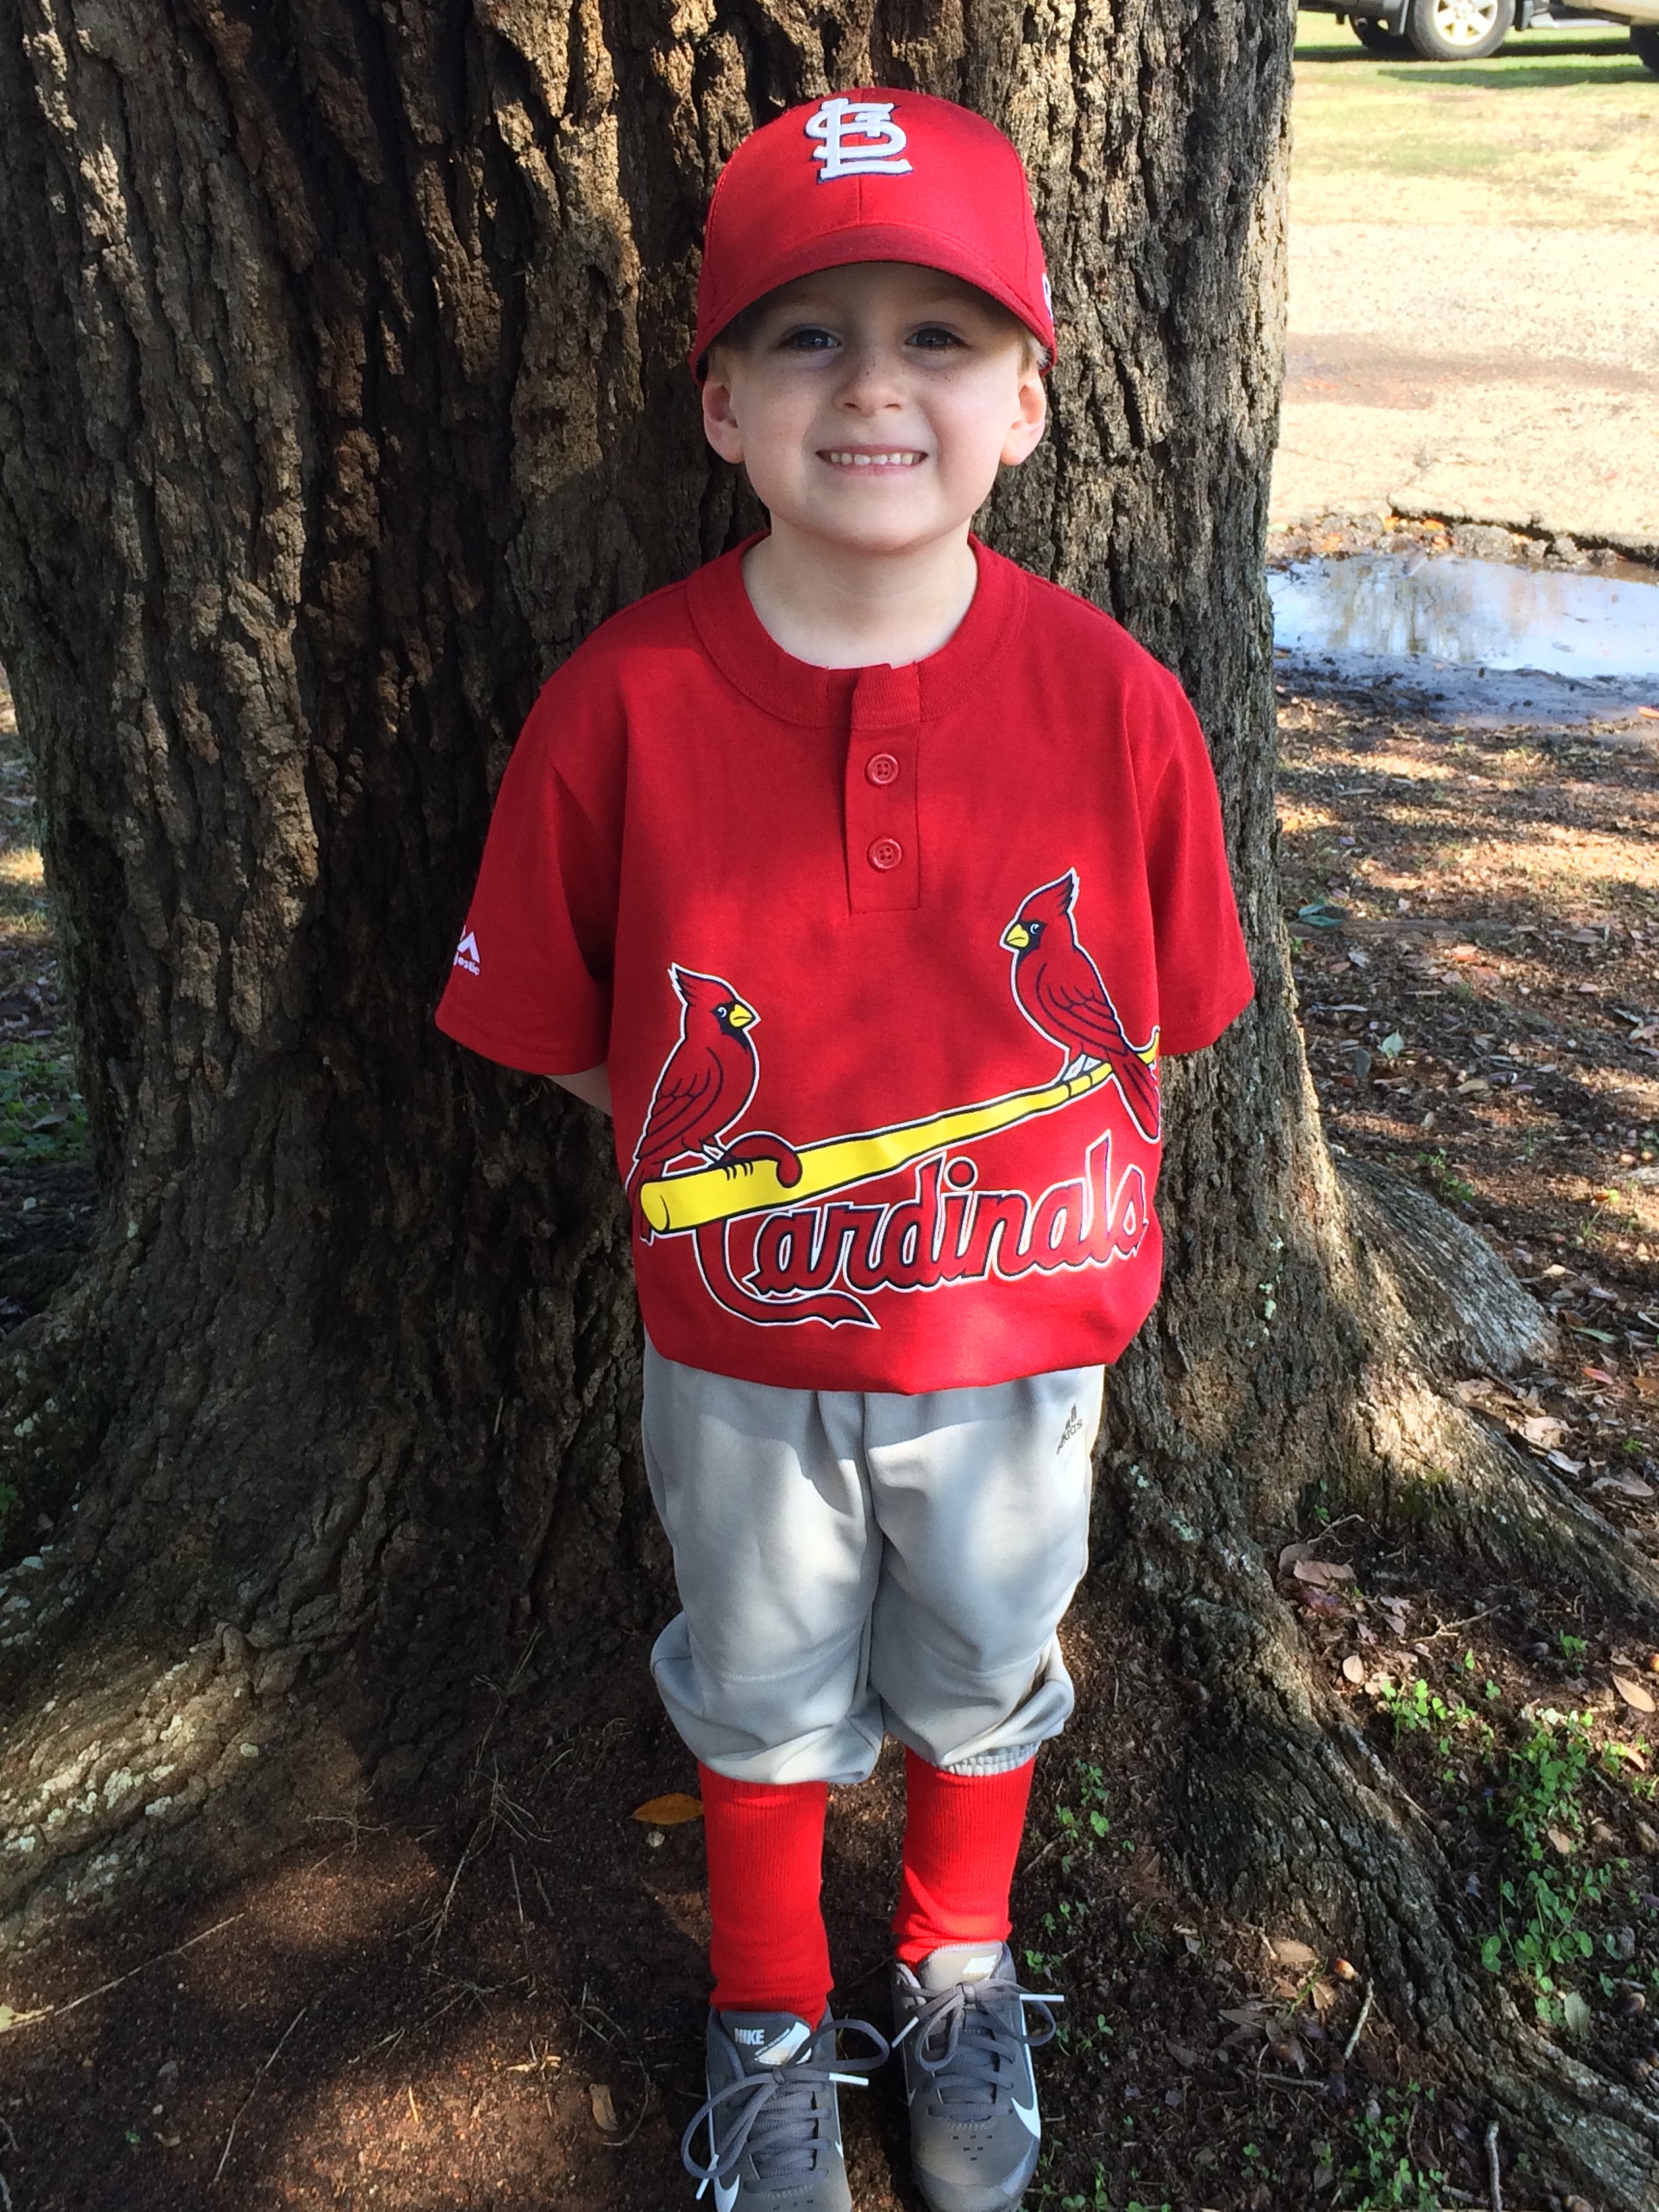 Bradley's favorite hobbies are fishing and baseball, two sports he's now participating in seizure-free.